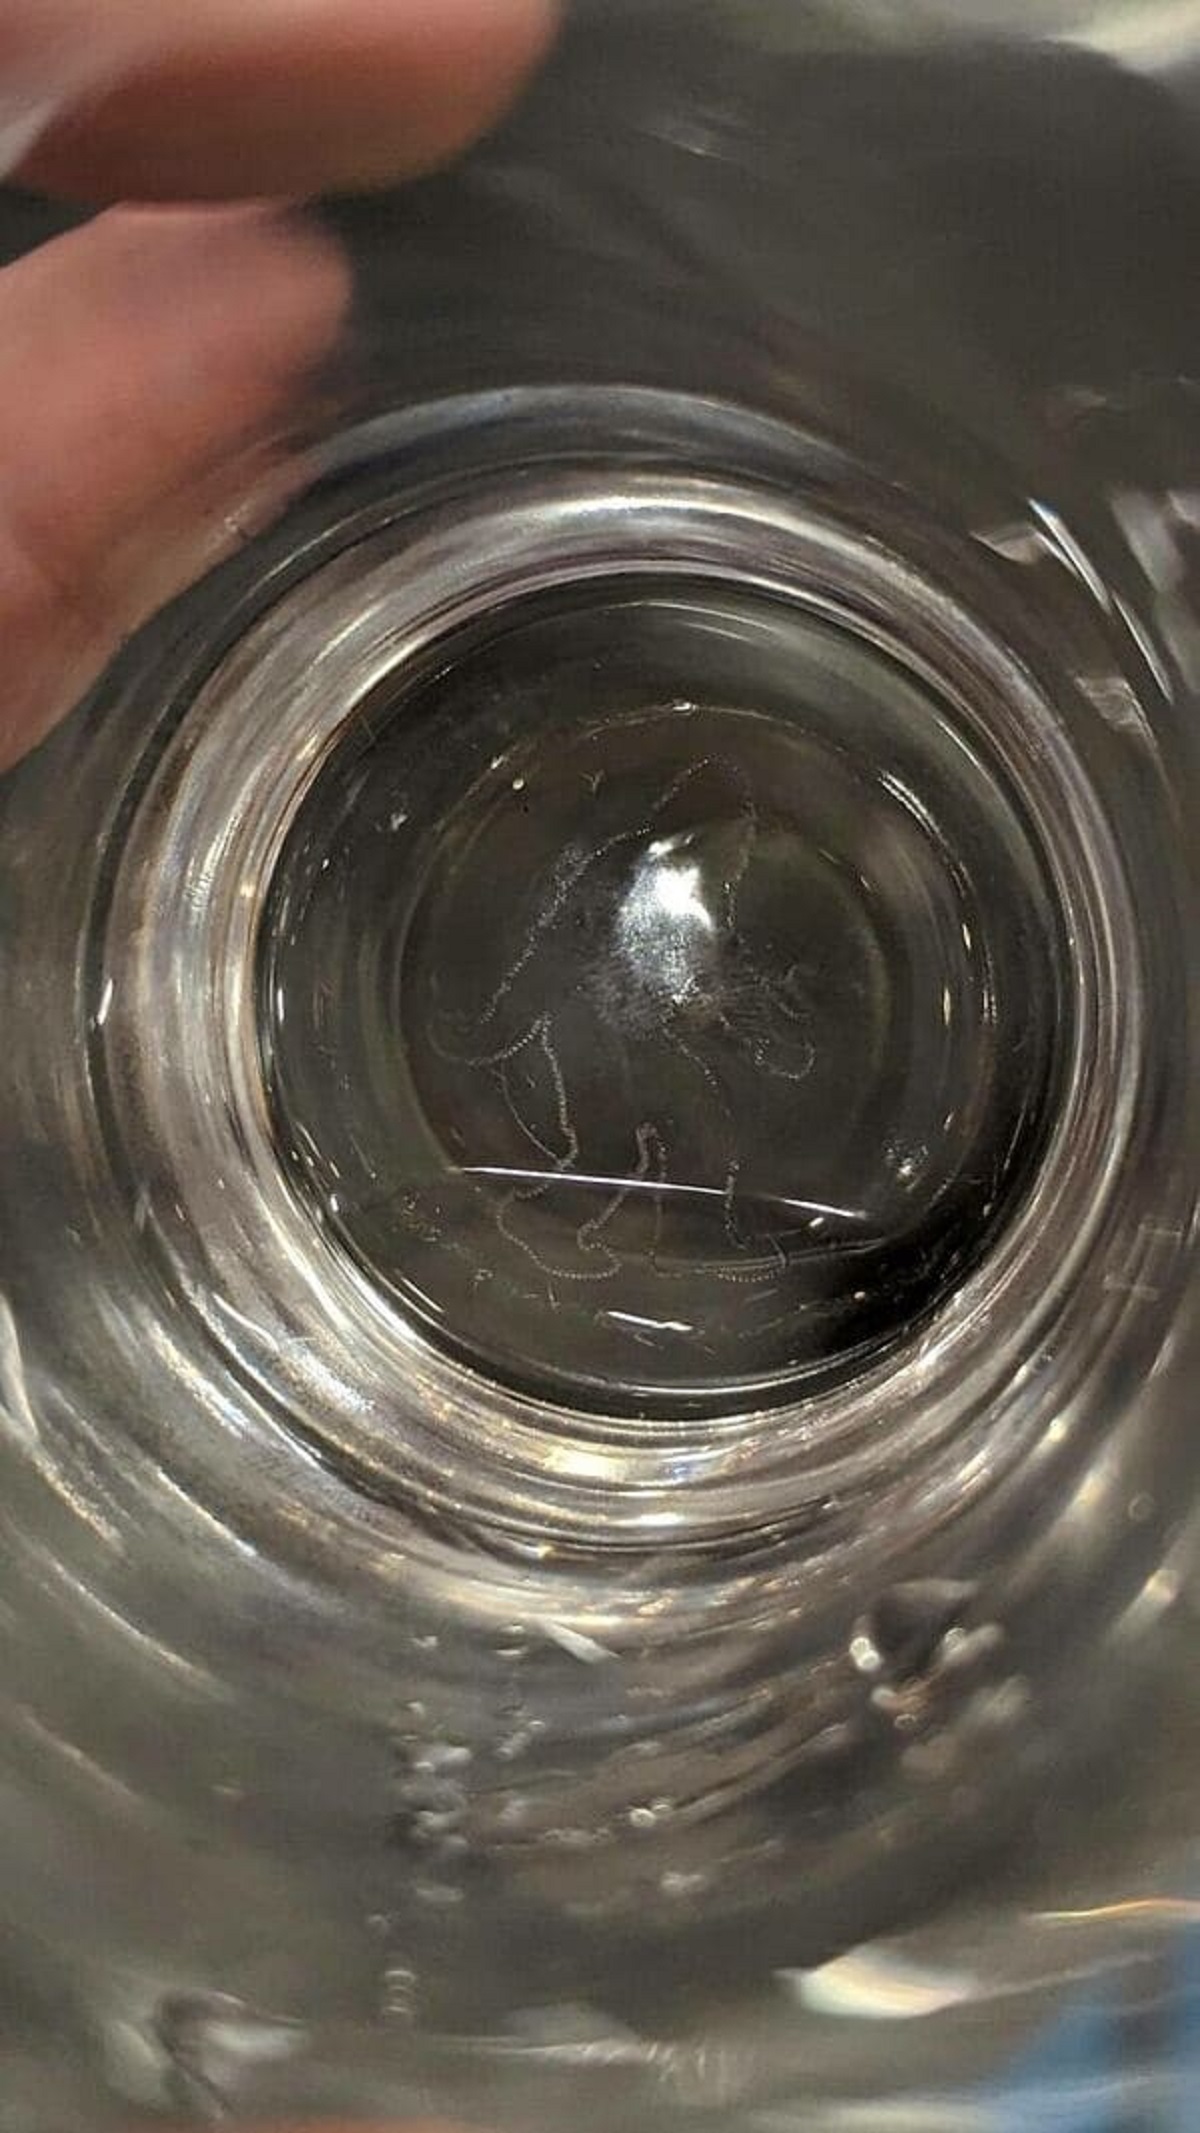 ”Hidden Brand Logo At The Bottom Of Their Beer Glass”